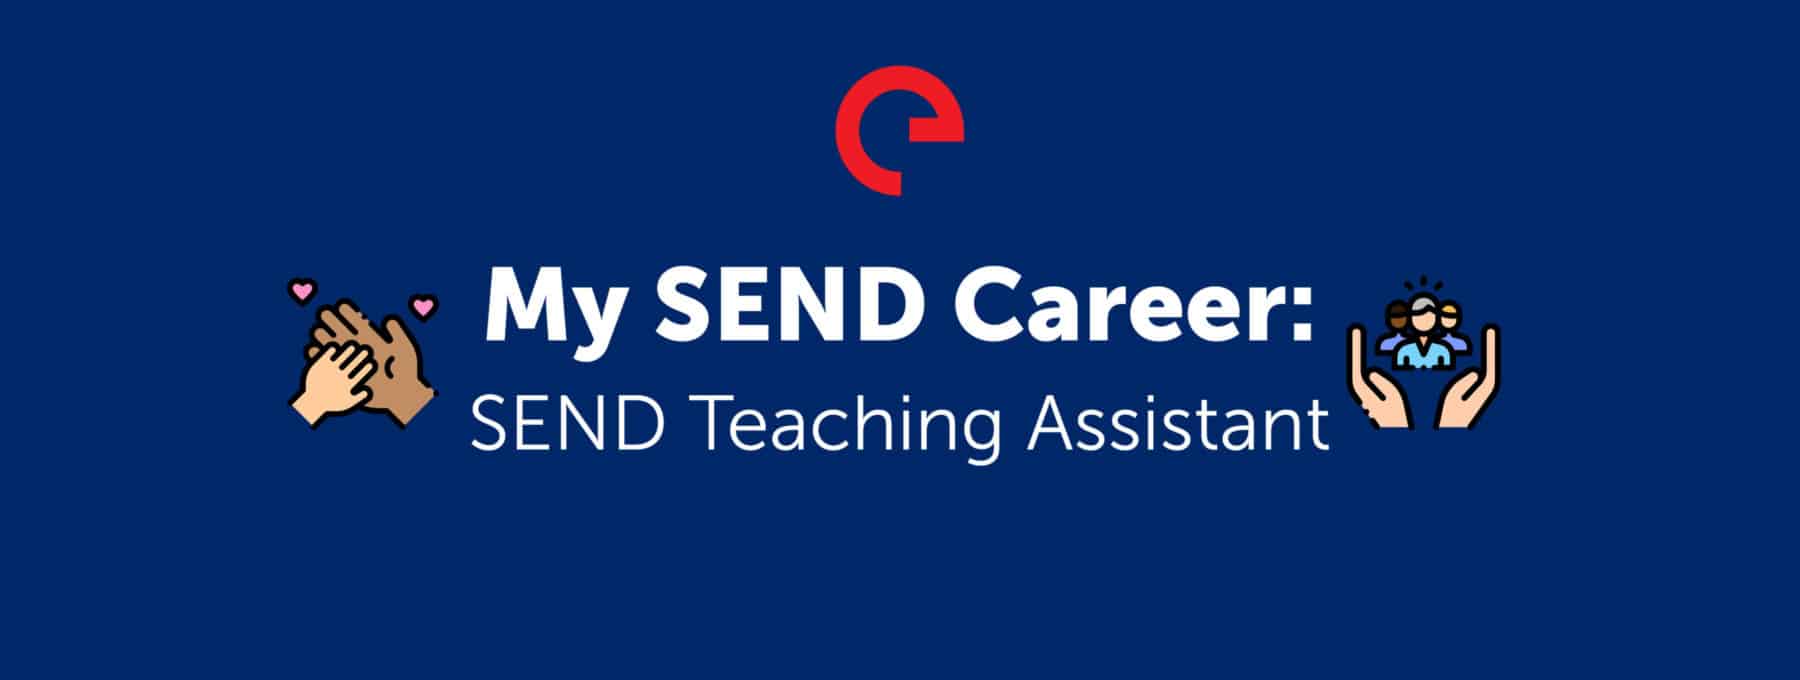 send teaching assistant personal statement